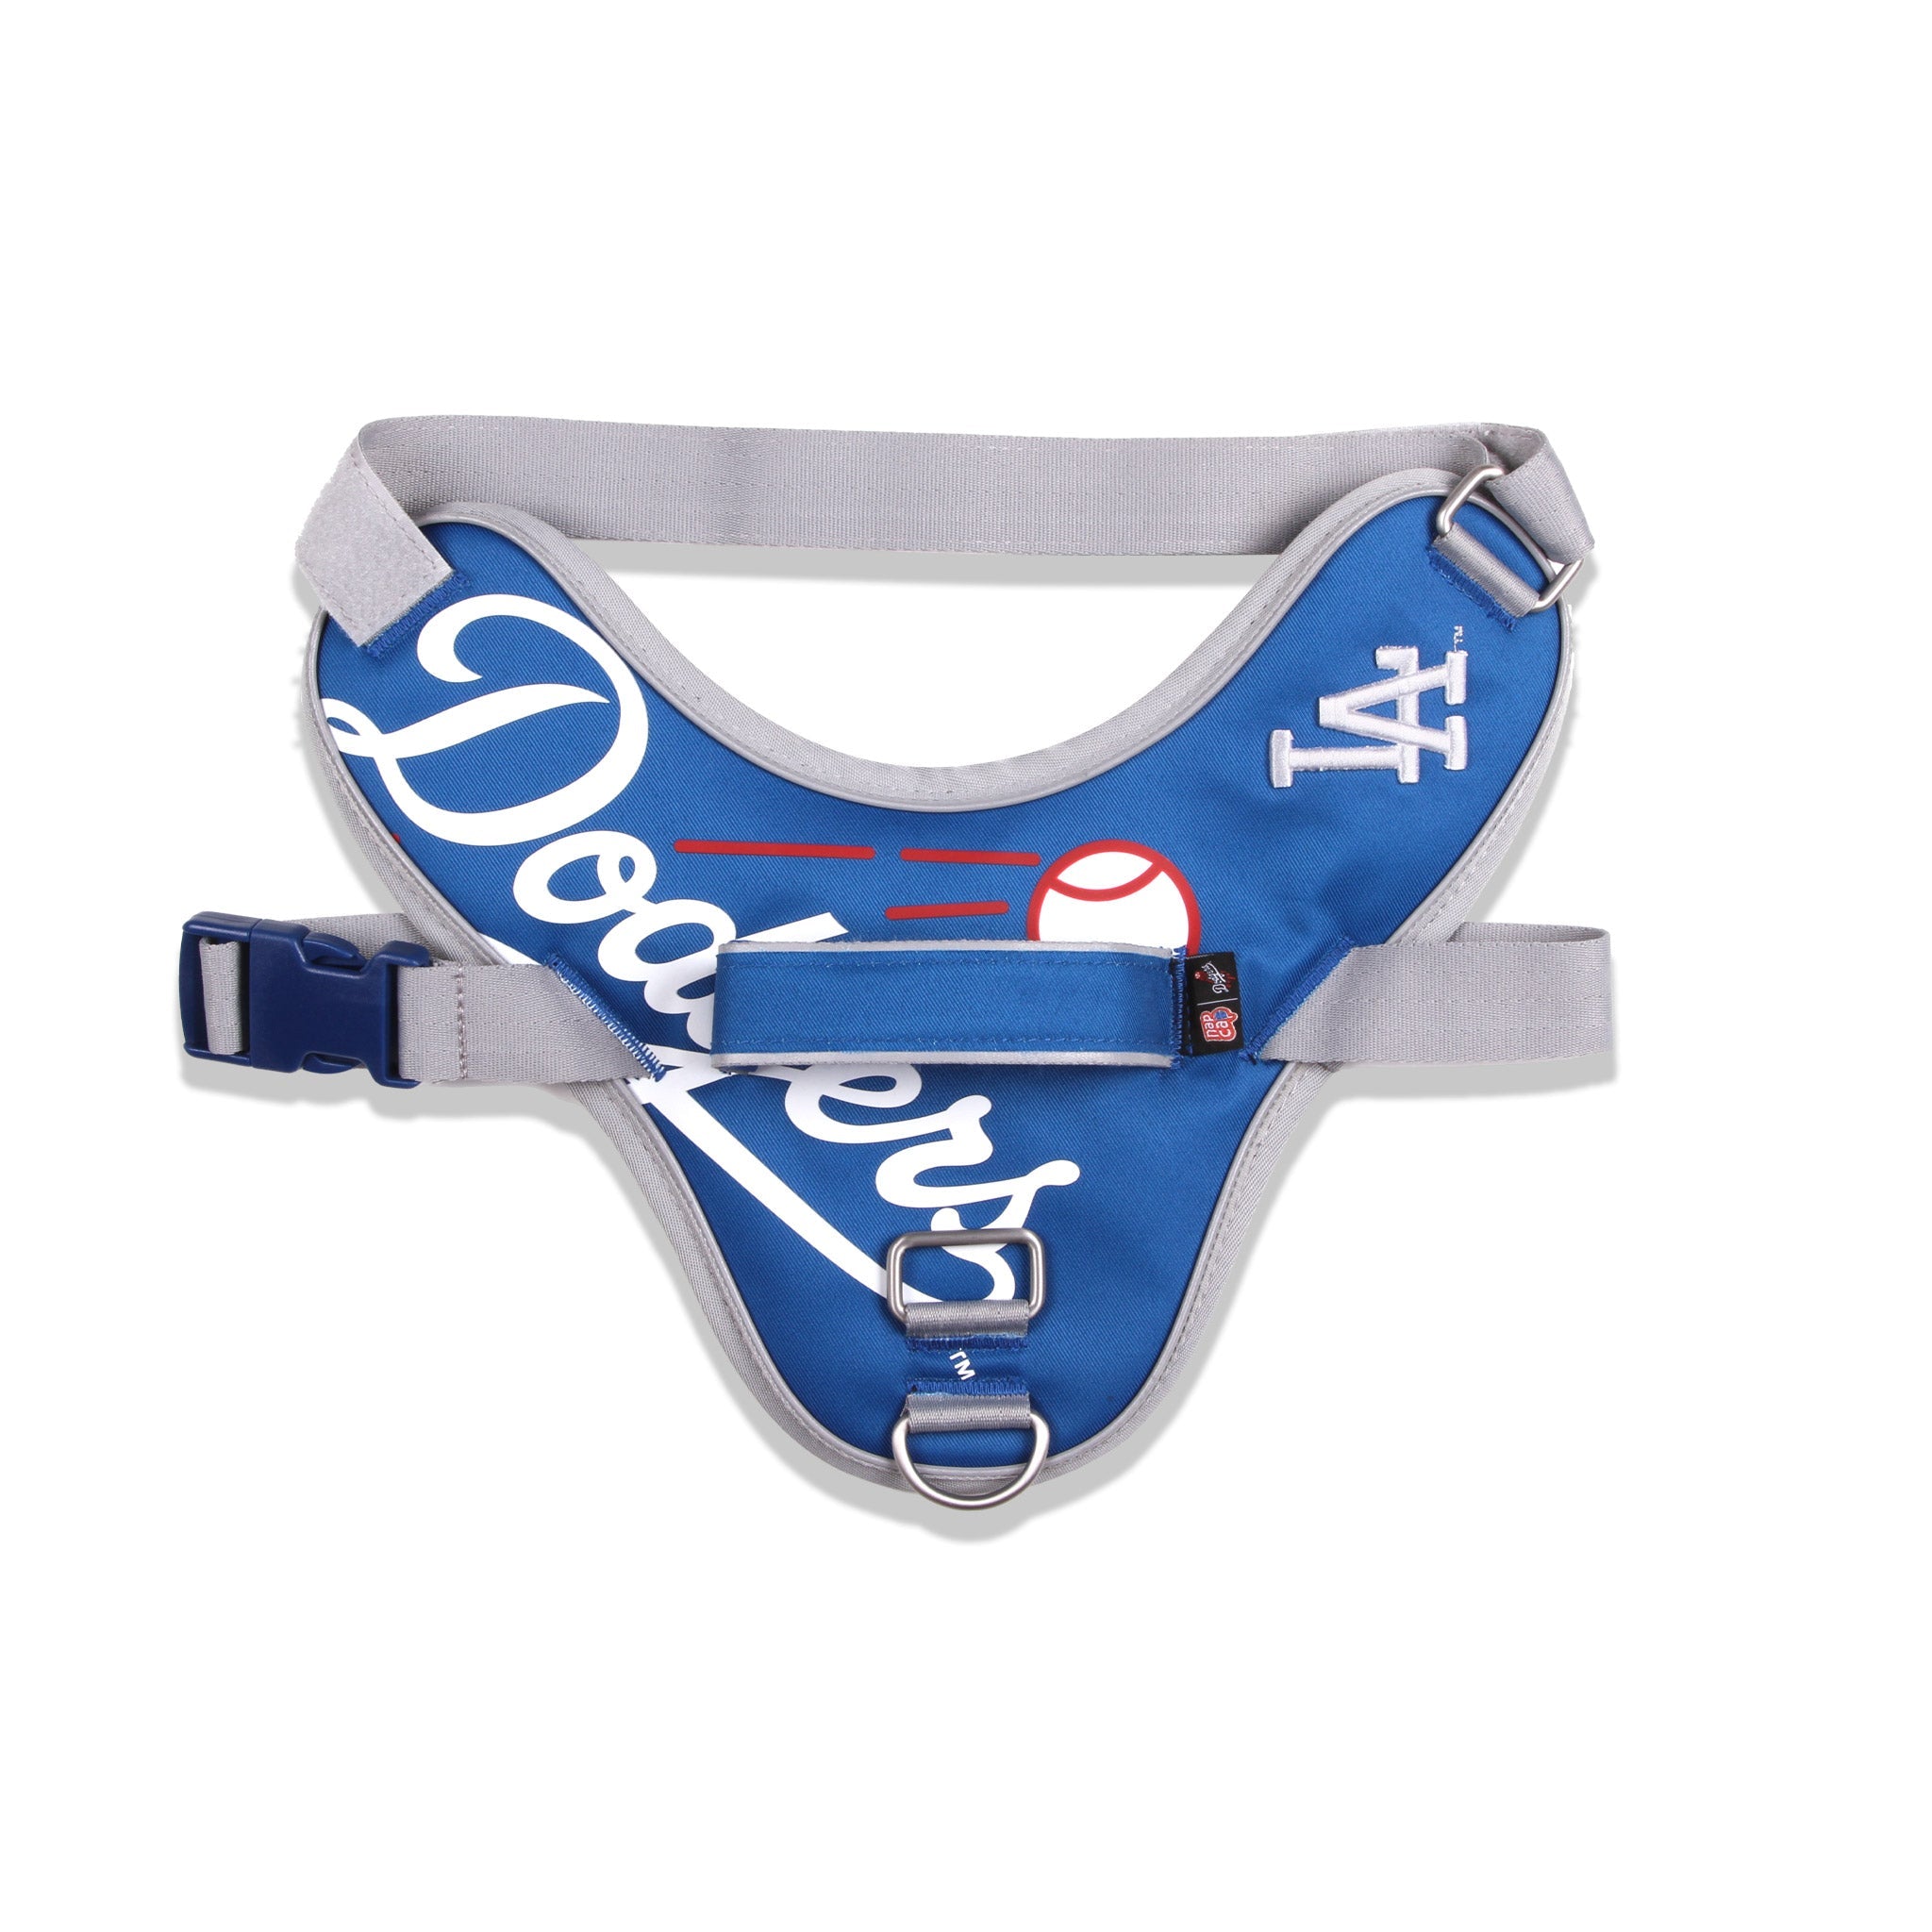 Official Los Angeles Dodgers Pet Gear, Dodgers Collars, Leashes